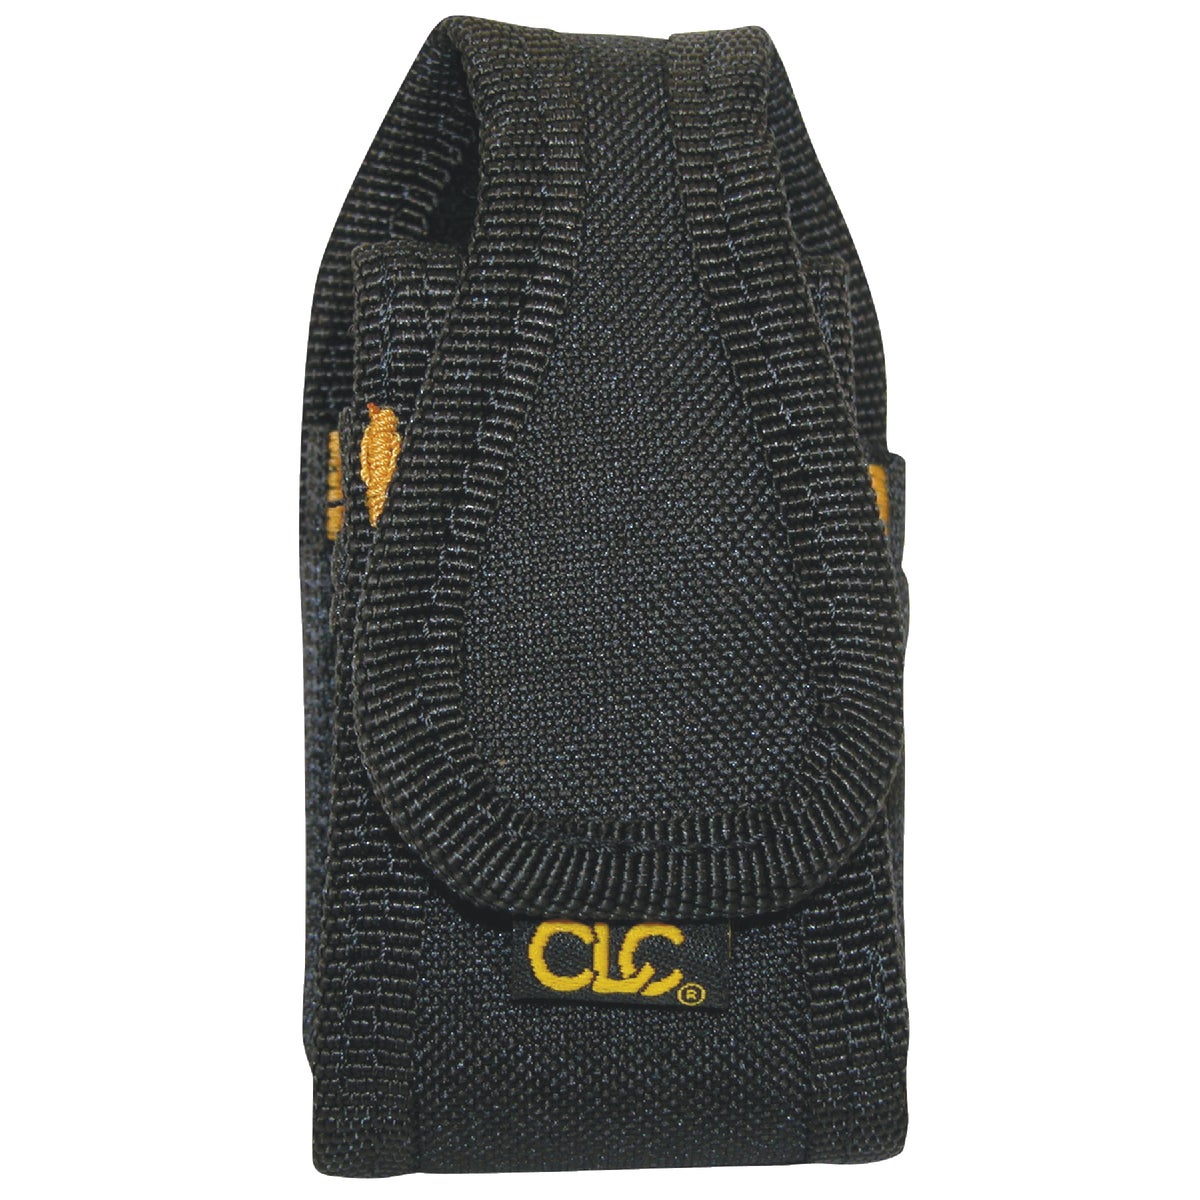 Item 328693, A smaller size cell phone holder with scratch-resistant fabric lining, has 